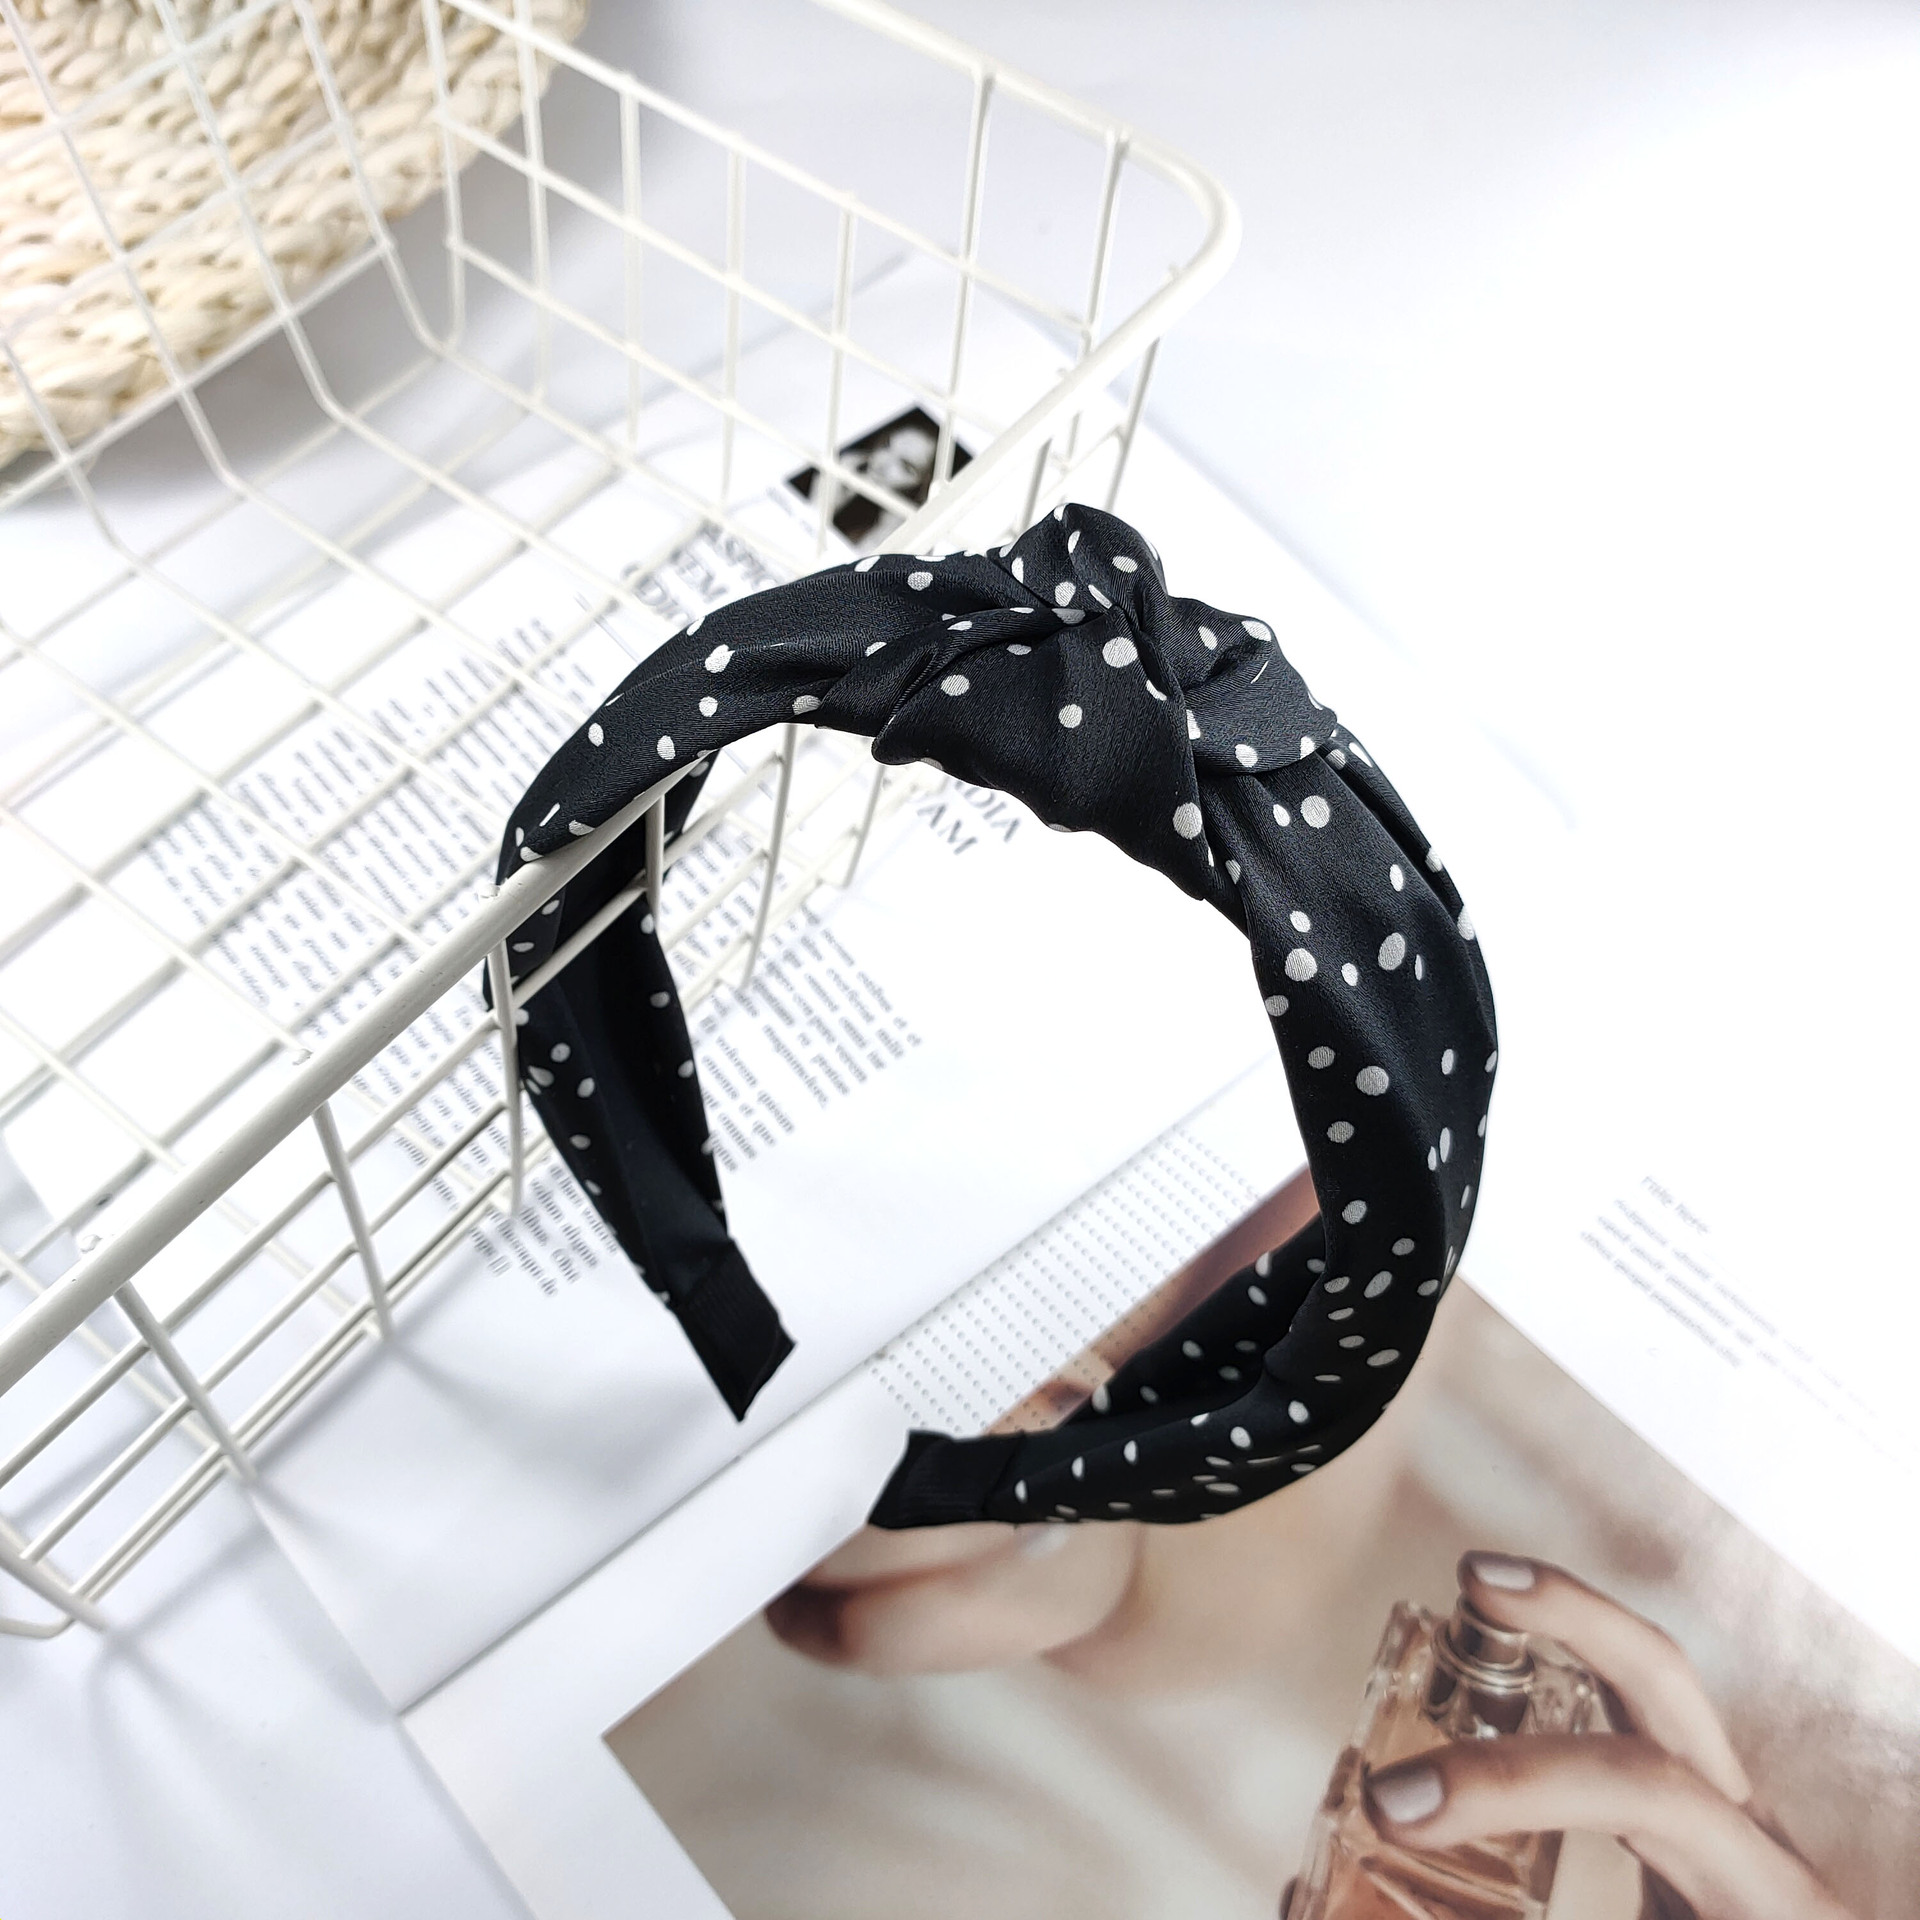 Korean fashion satin fabric wavelet knotted headband widebrimmed simple temperament hairpin spring and summer new headband hair accessories wholesale nihaojewelrypicture7